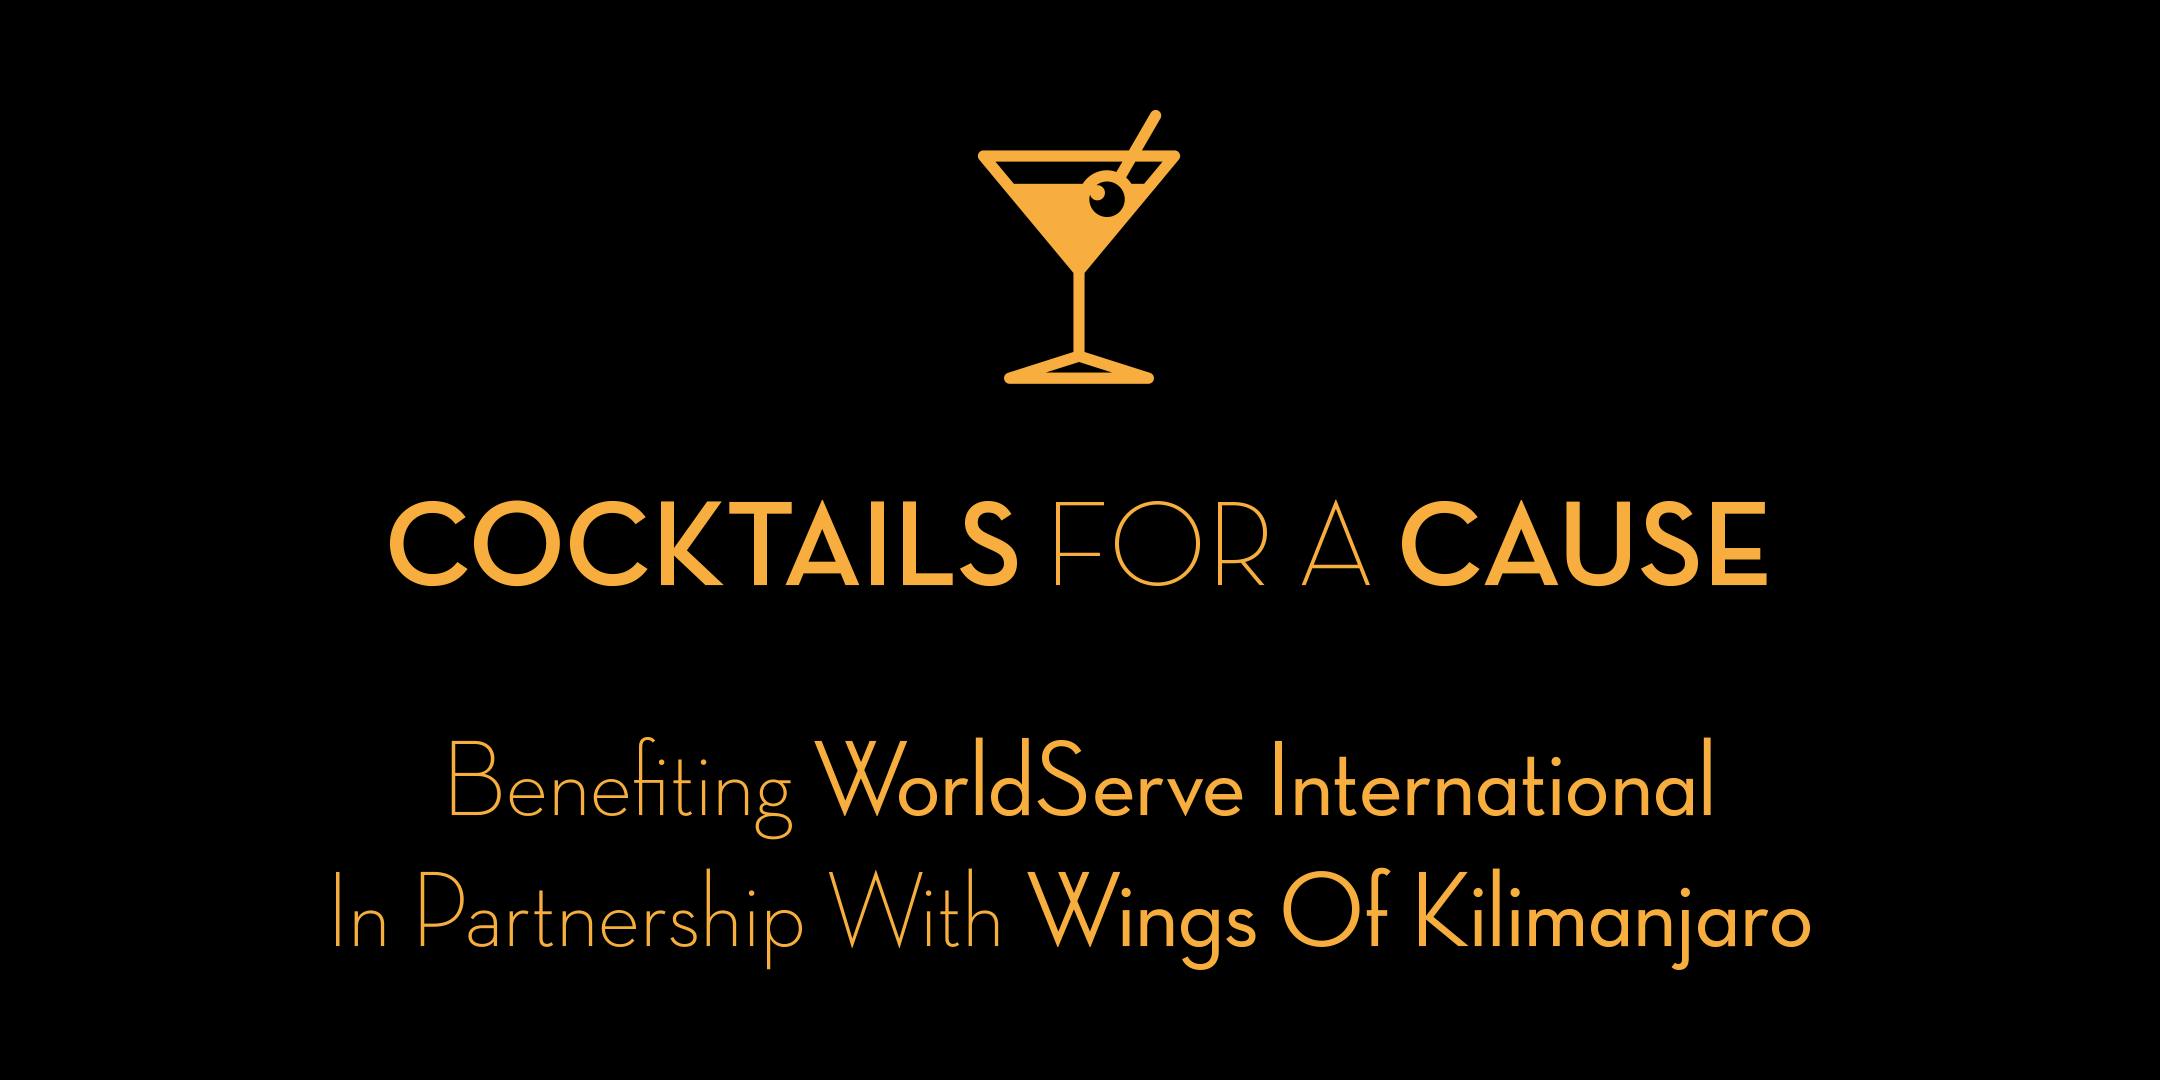 Cocktails for a Cause: a WOK Event to Benefit WorldServe International